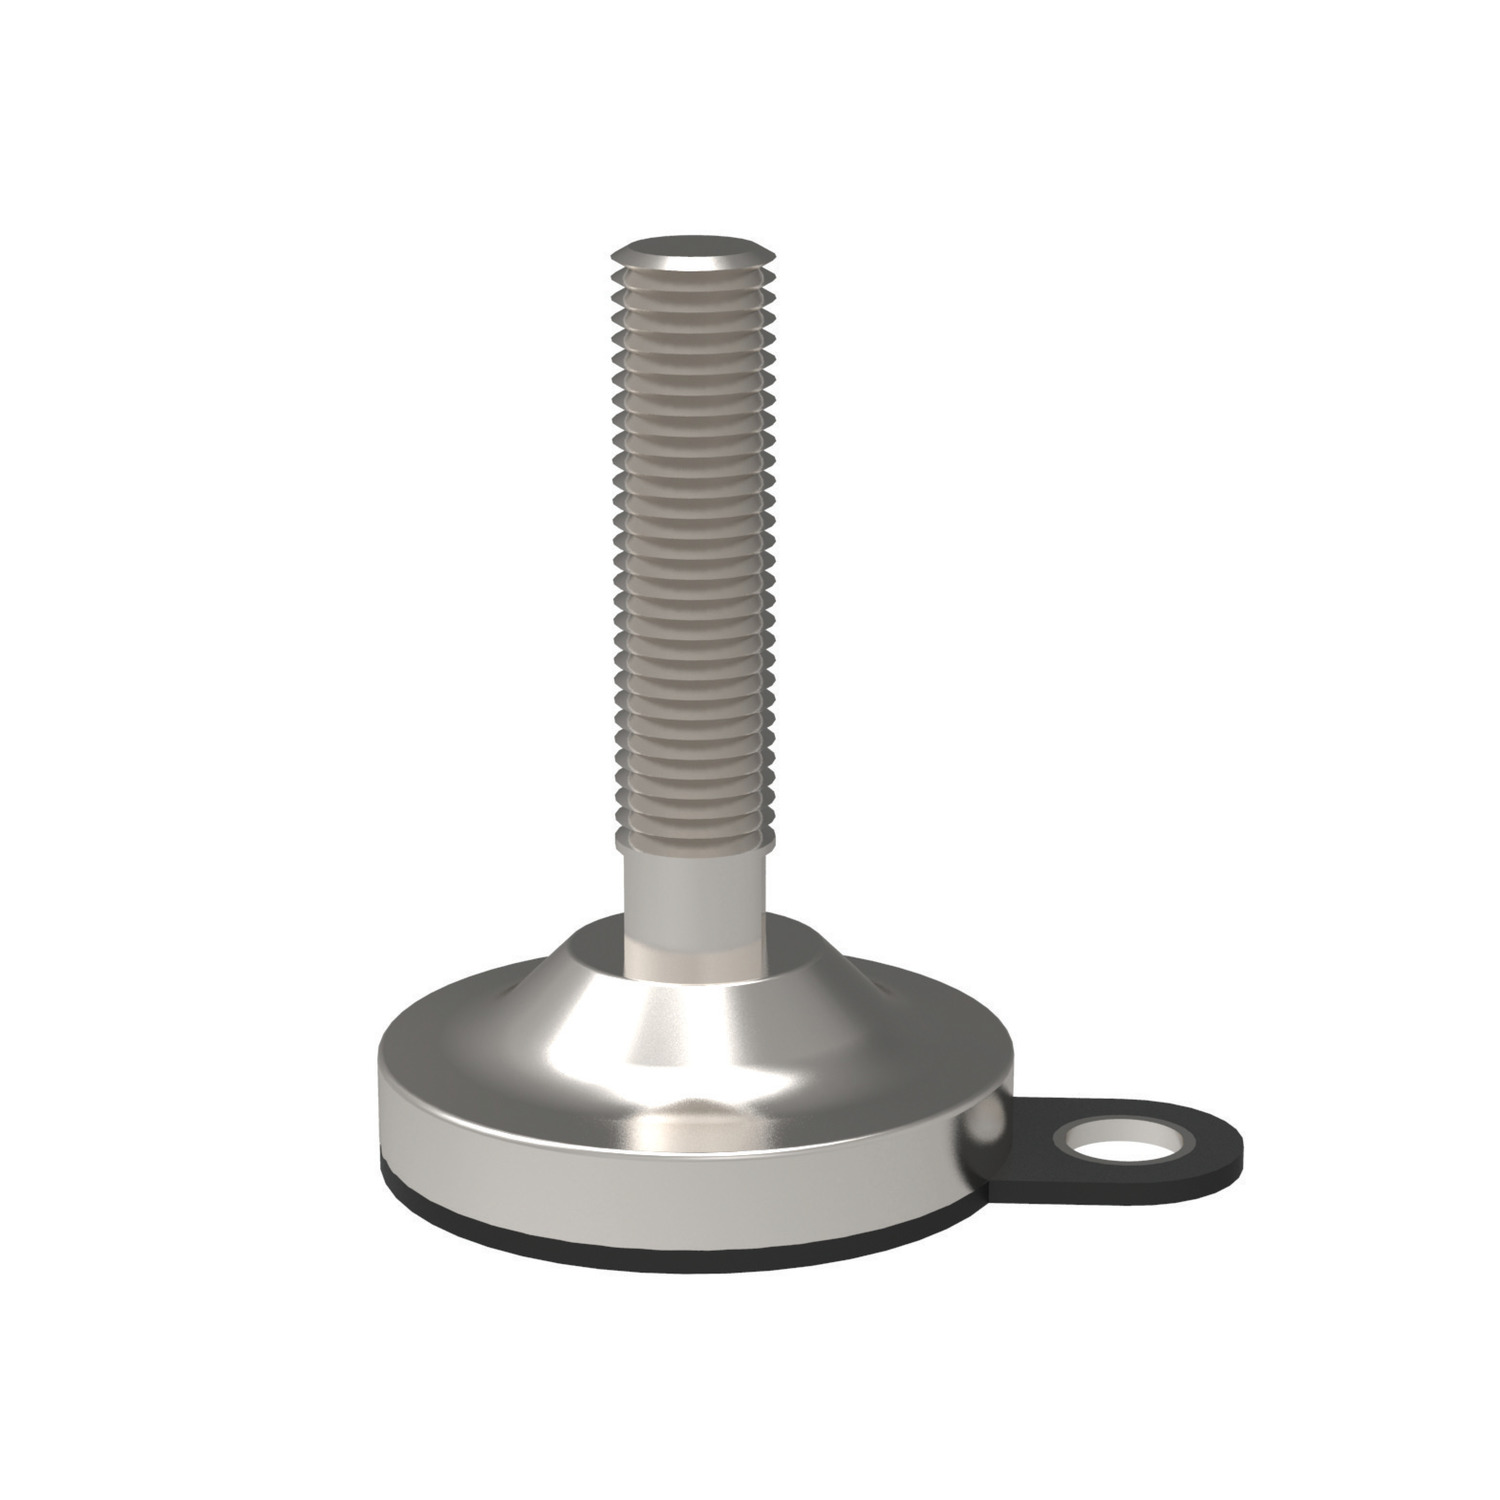 34704.W1603 Full Steel Levelling Feet - Bolt Down D.80 with 1 x mounting hole M16 x 200 Zinc-plated + rubber